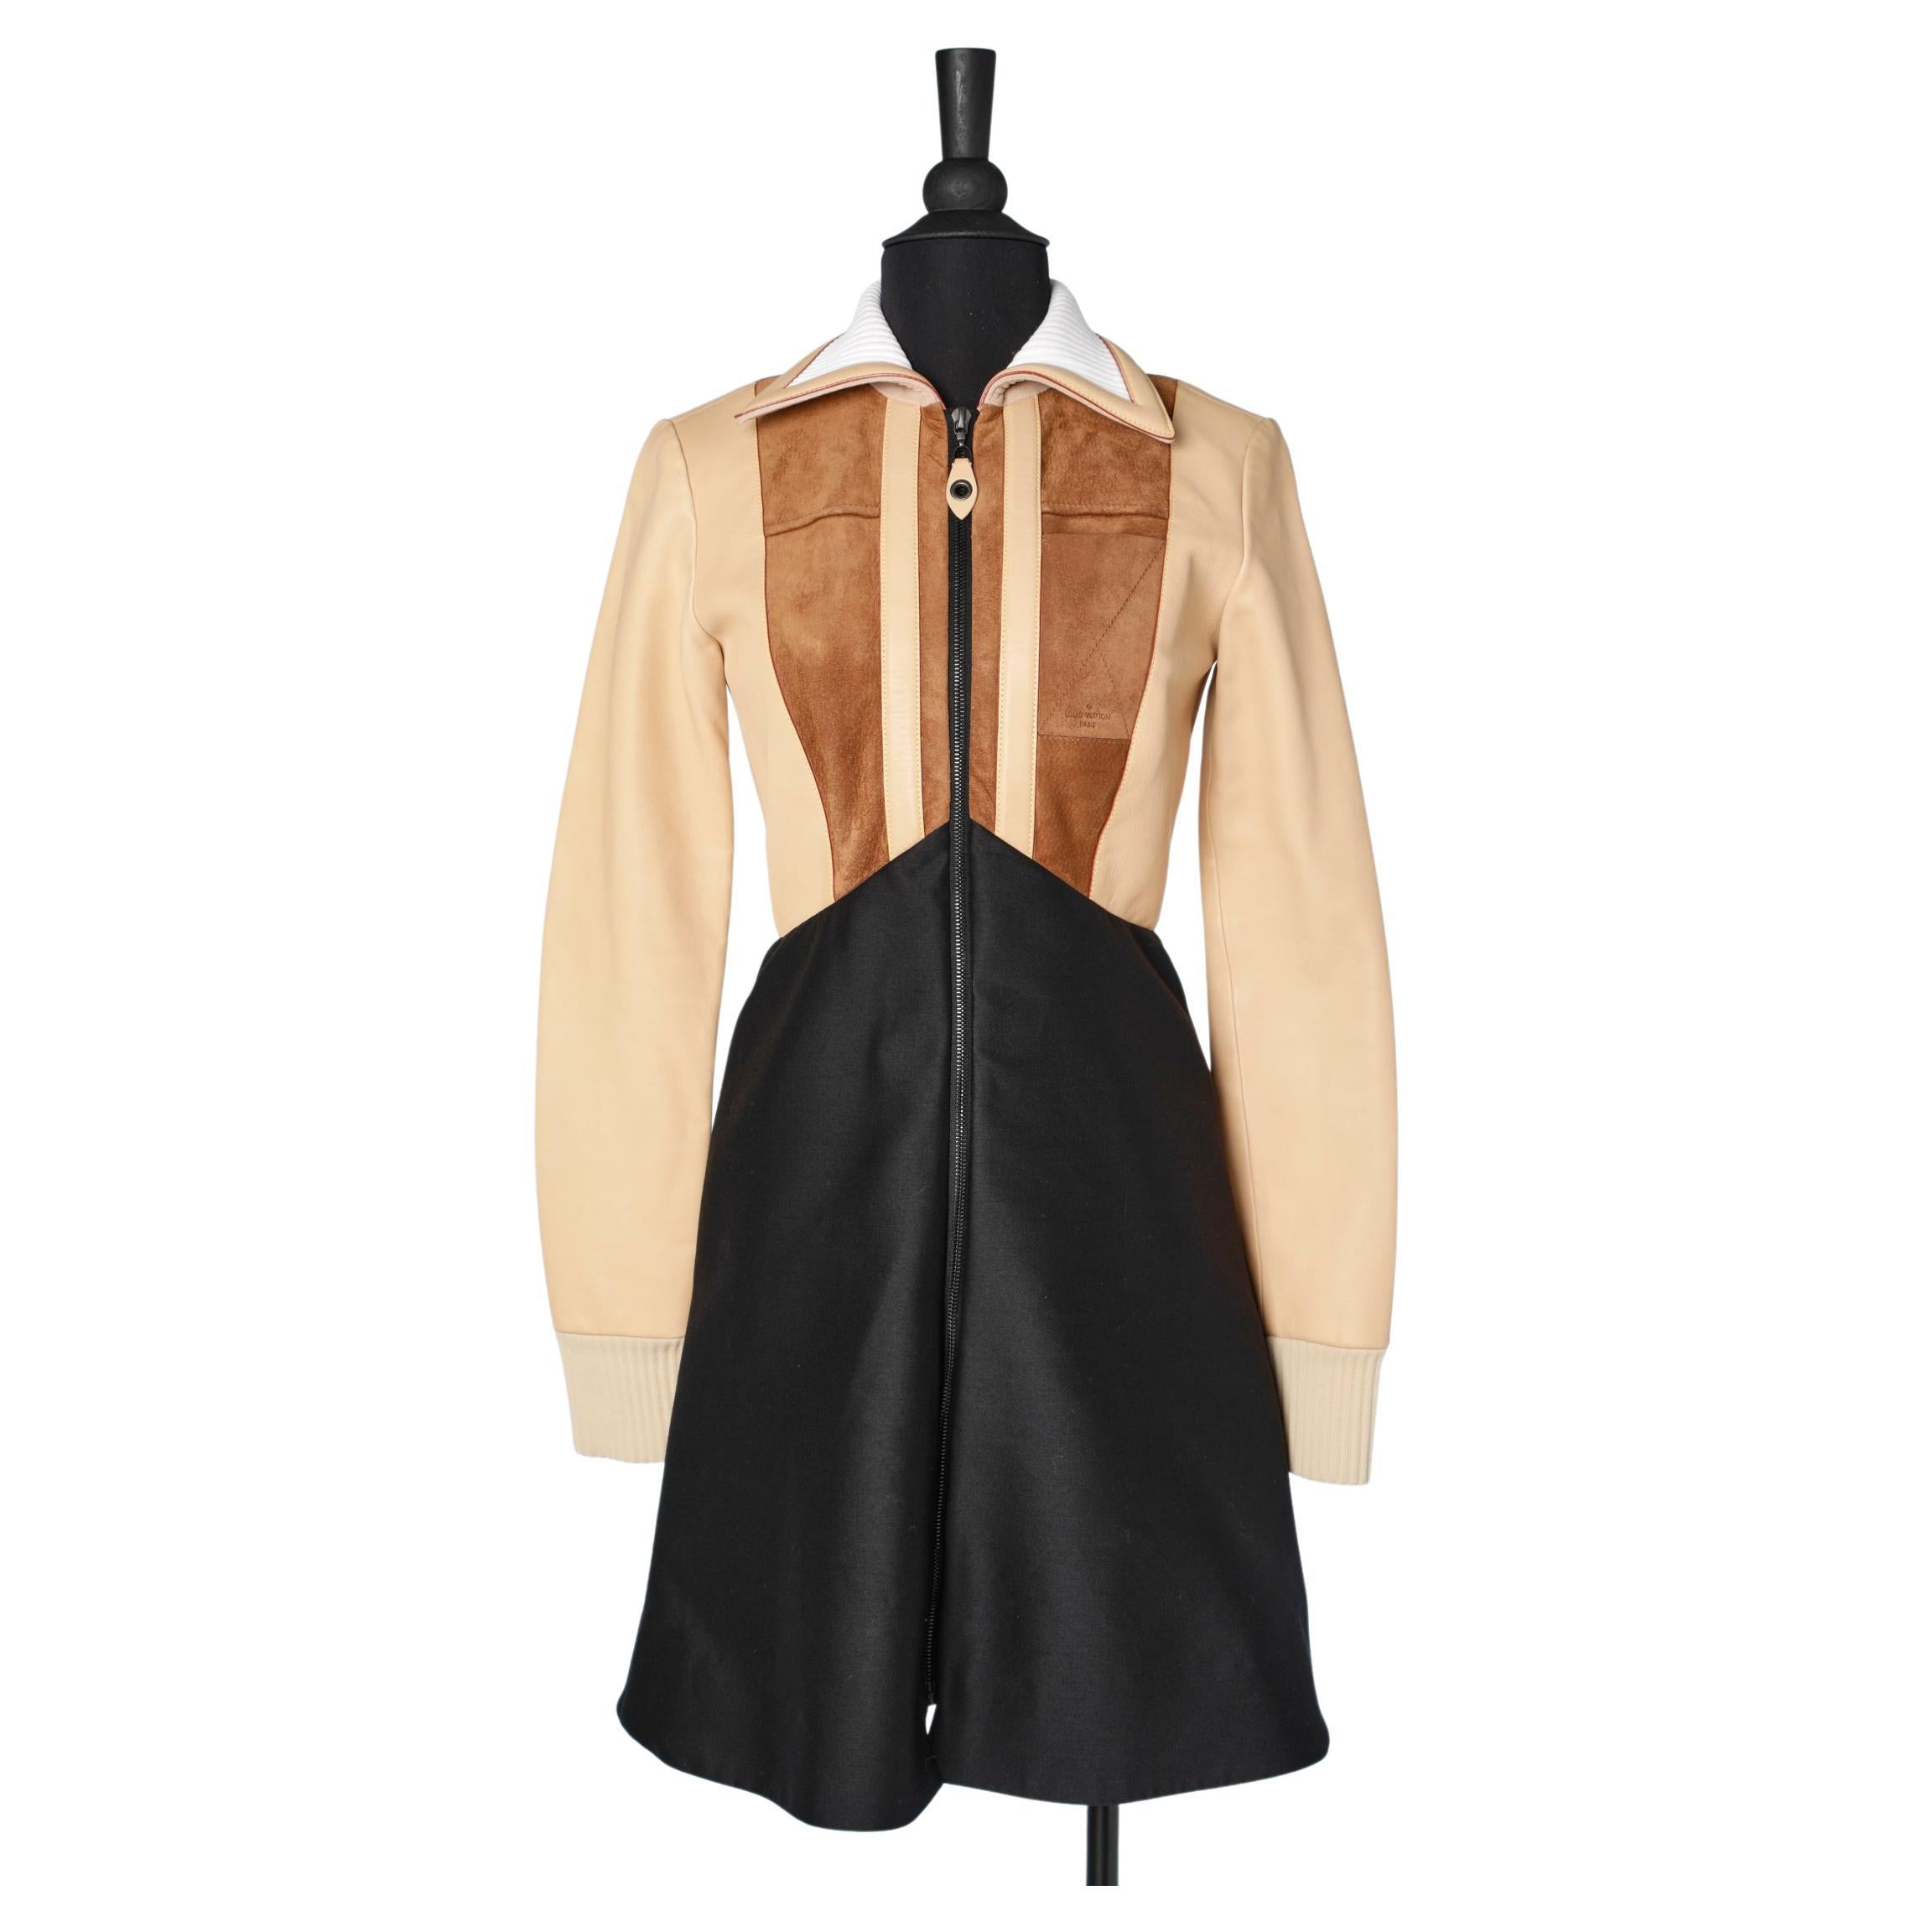 Suede, leather and wool patchwork dress with zip Louis Vuitton 